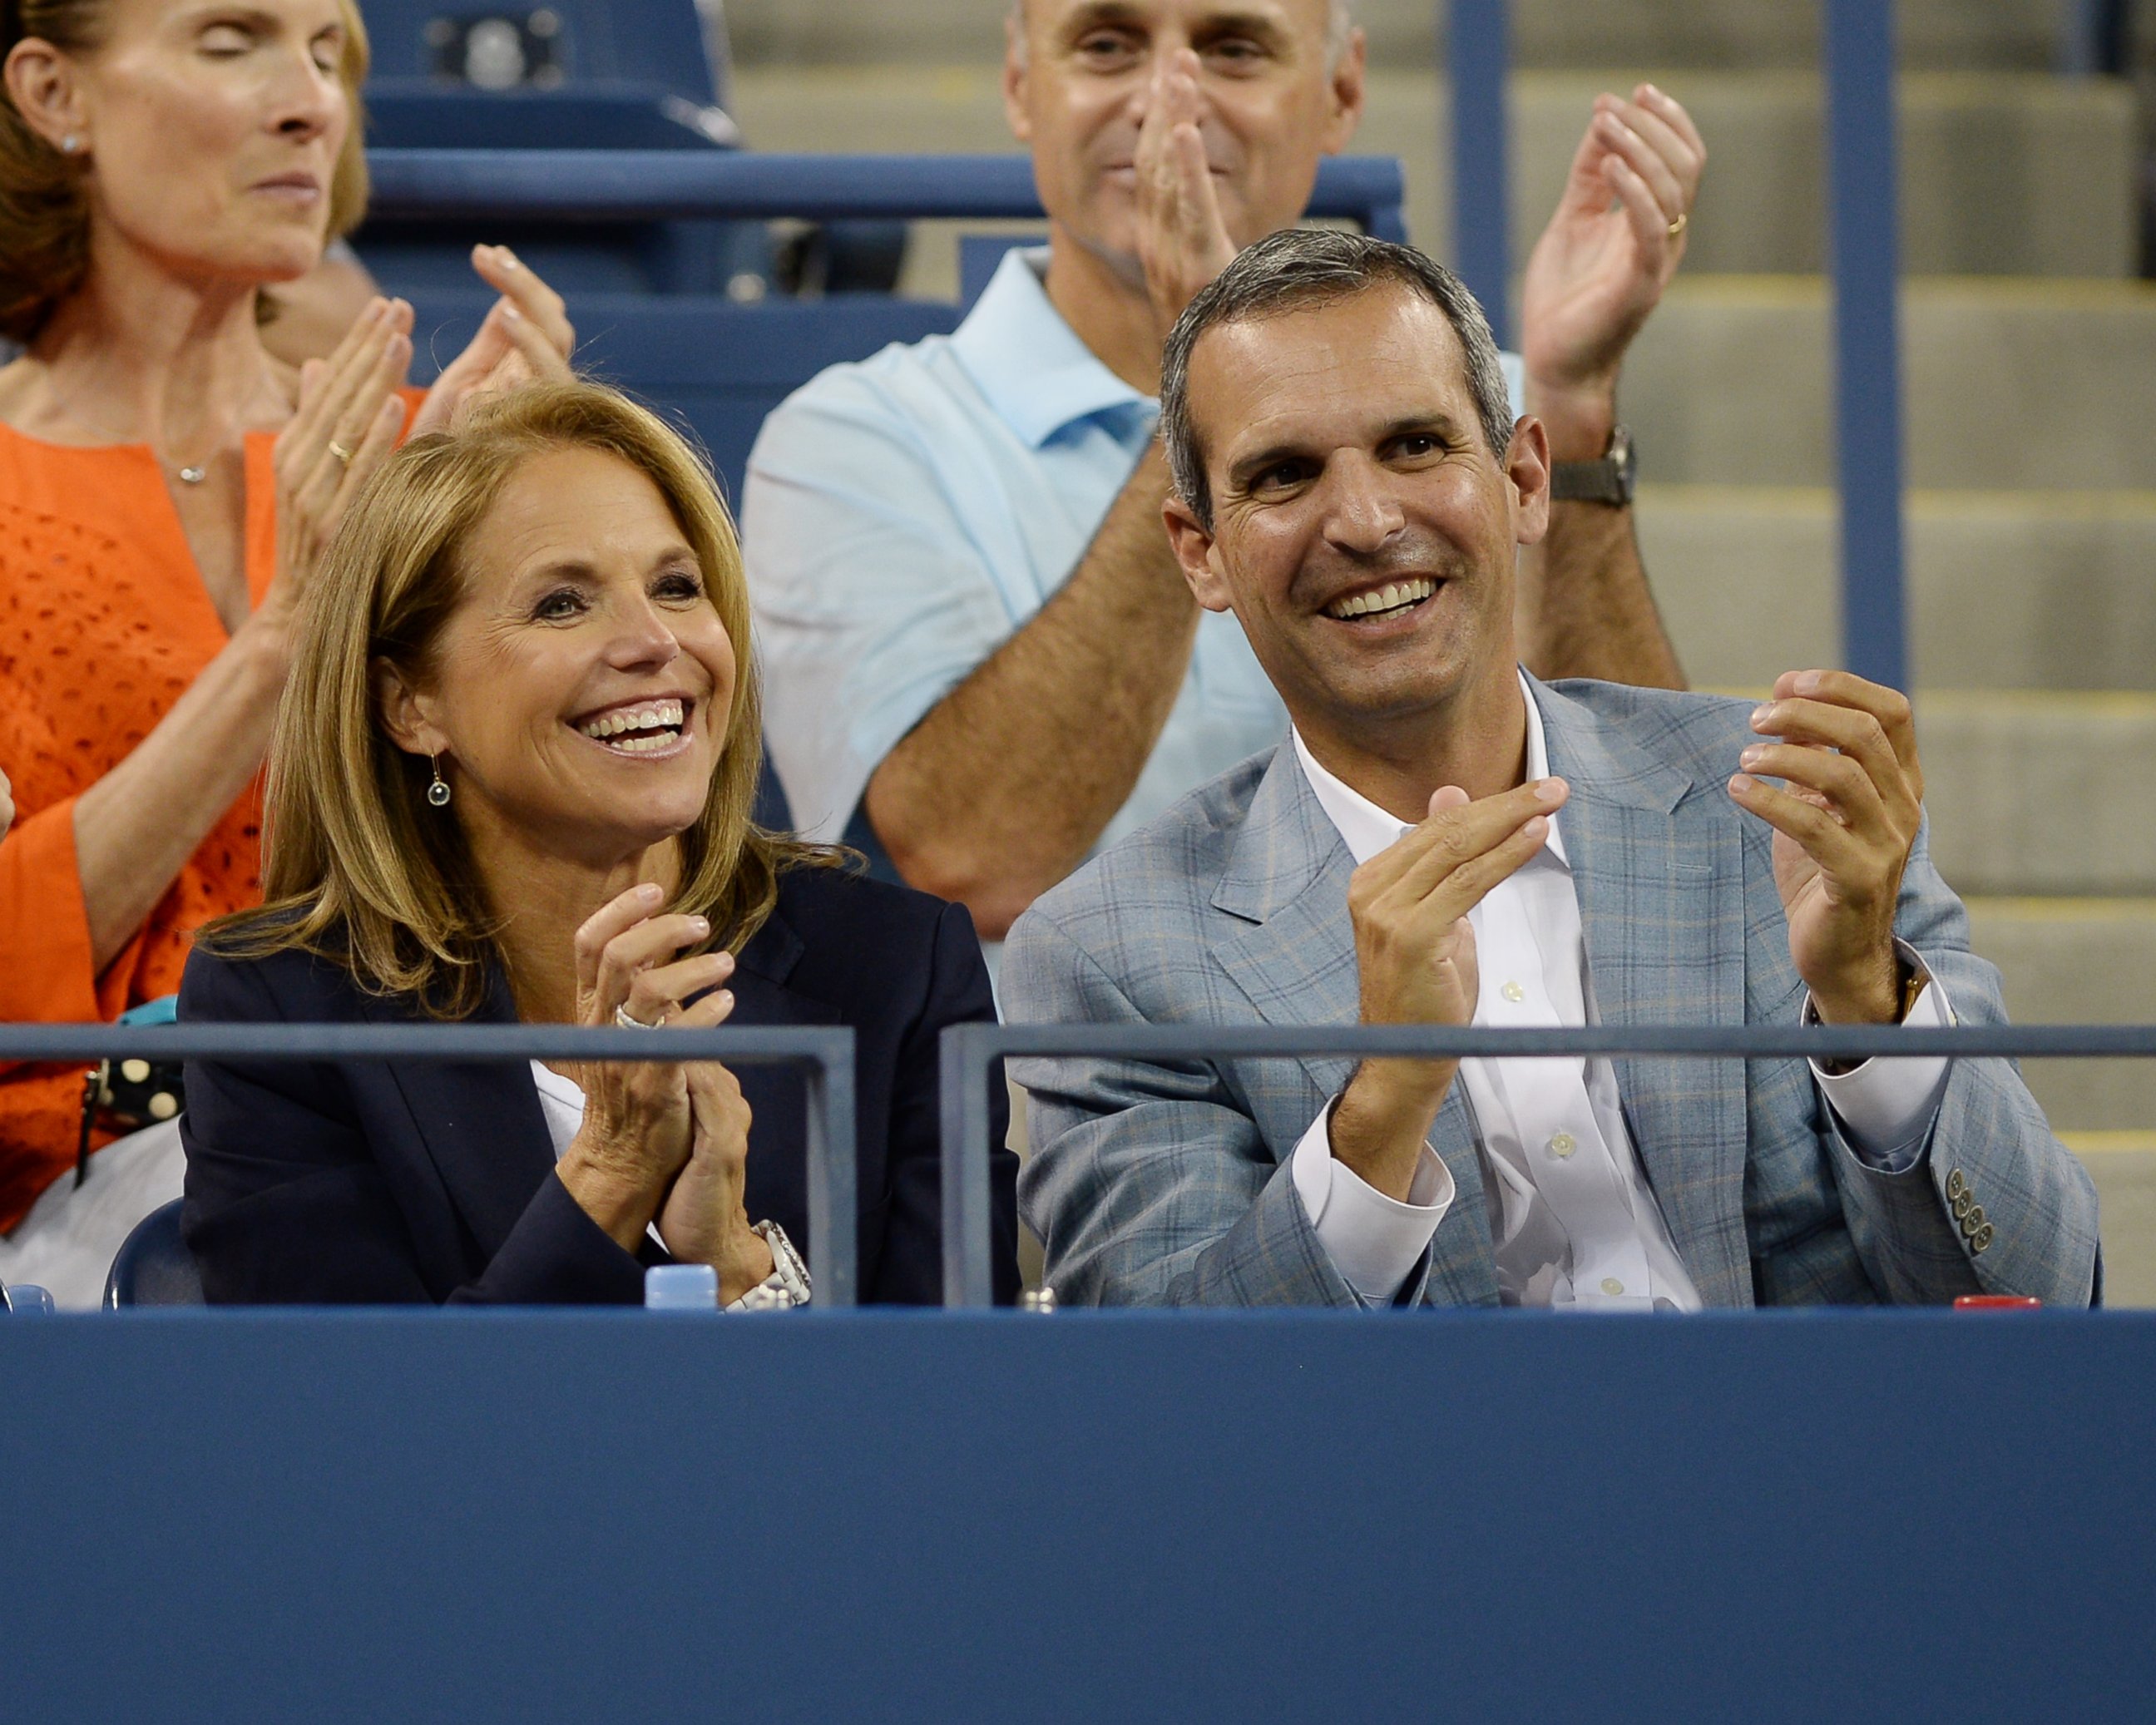 PHOTO: Katie Couric and John Molner